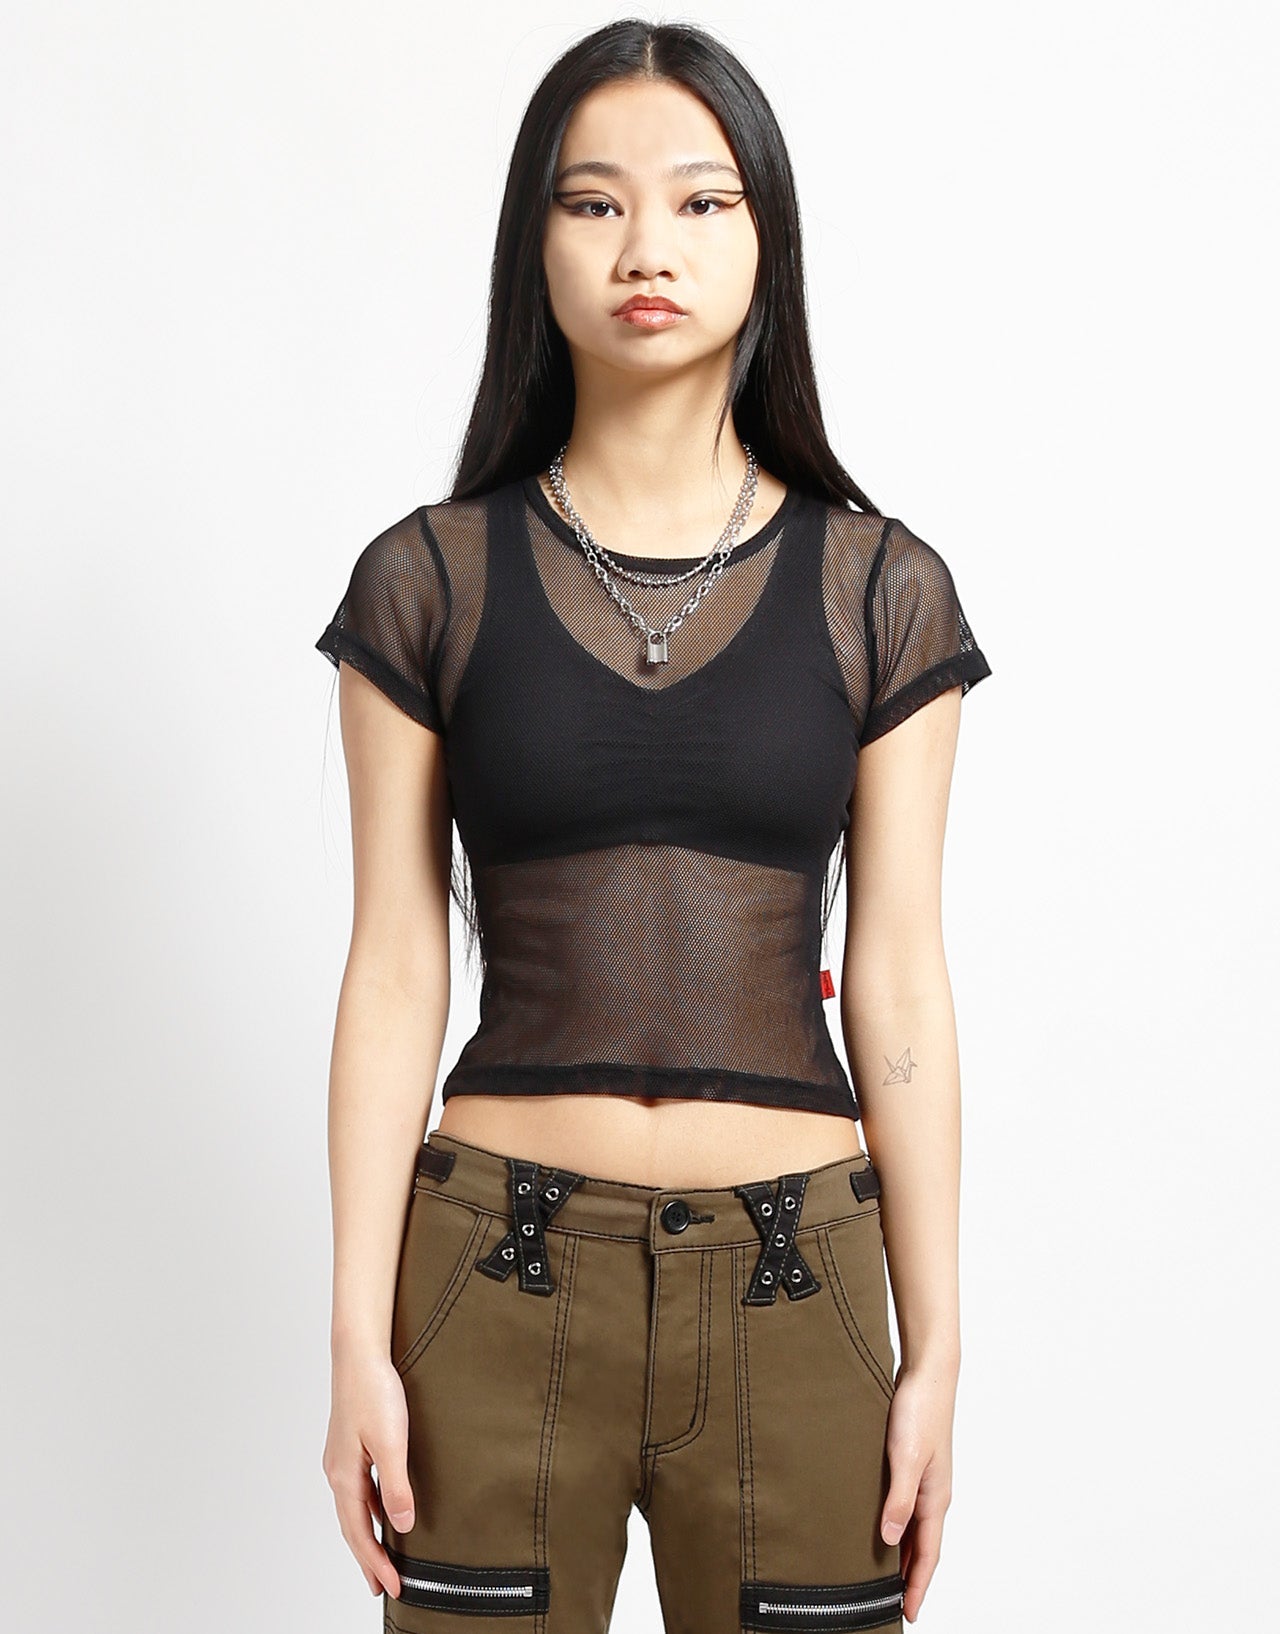 A model wearing the black Baby Short Sleeve Fishnet Tee Shirt with brown pants, front view.